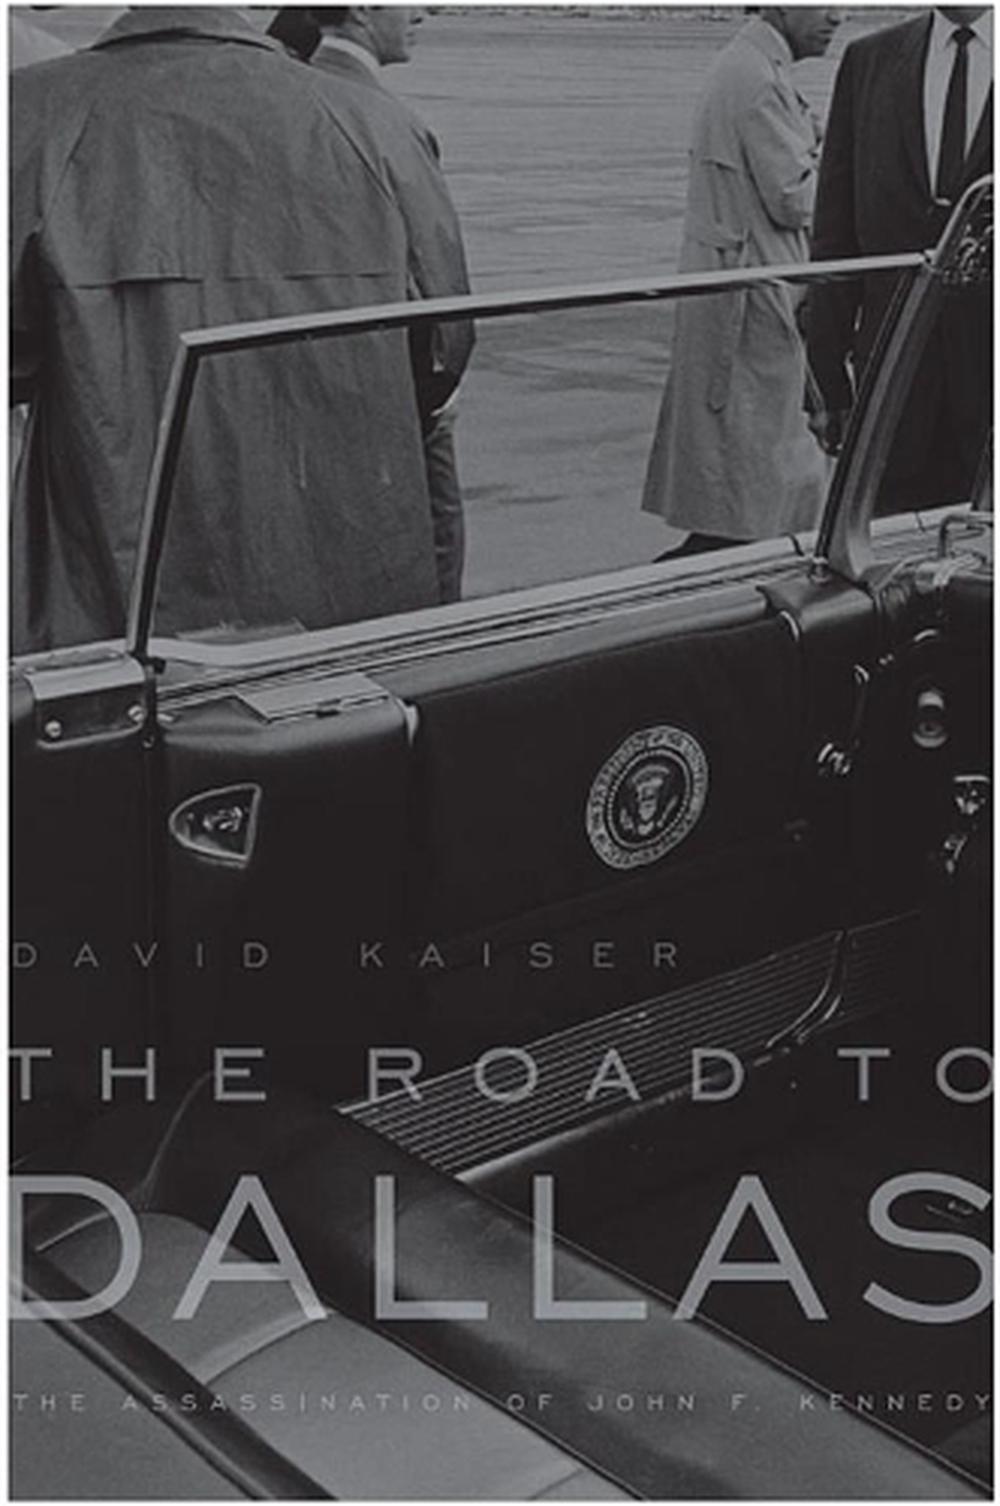 The Road to Dallas: The Assassination of John F. Kennedy ...